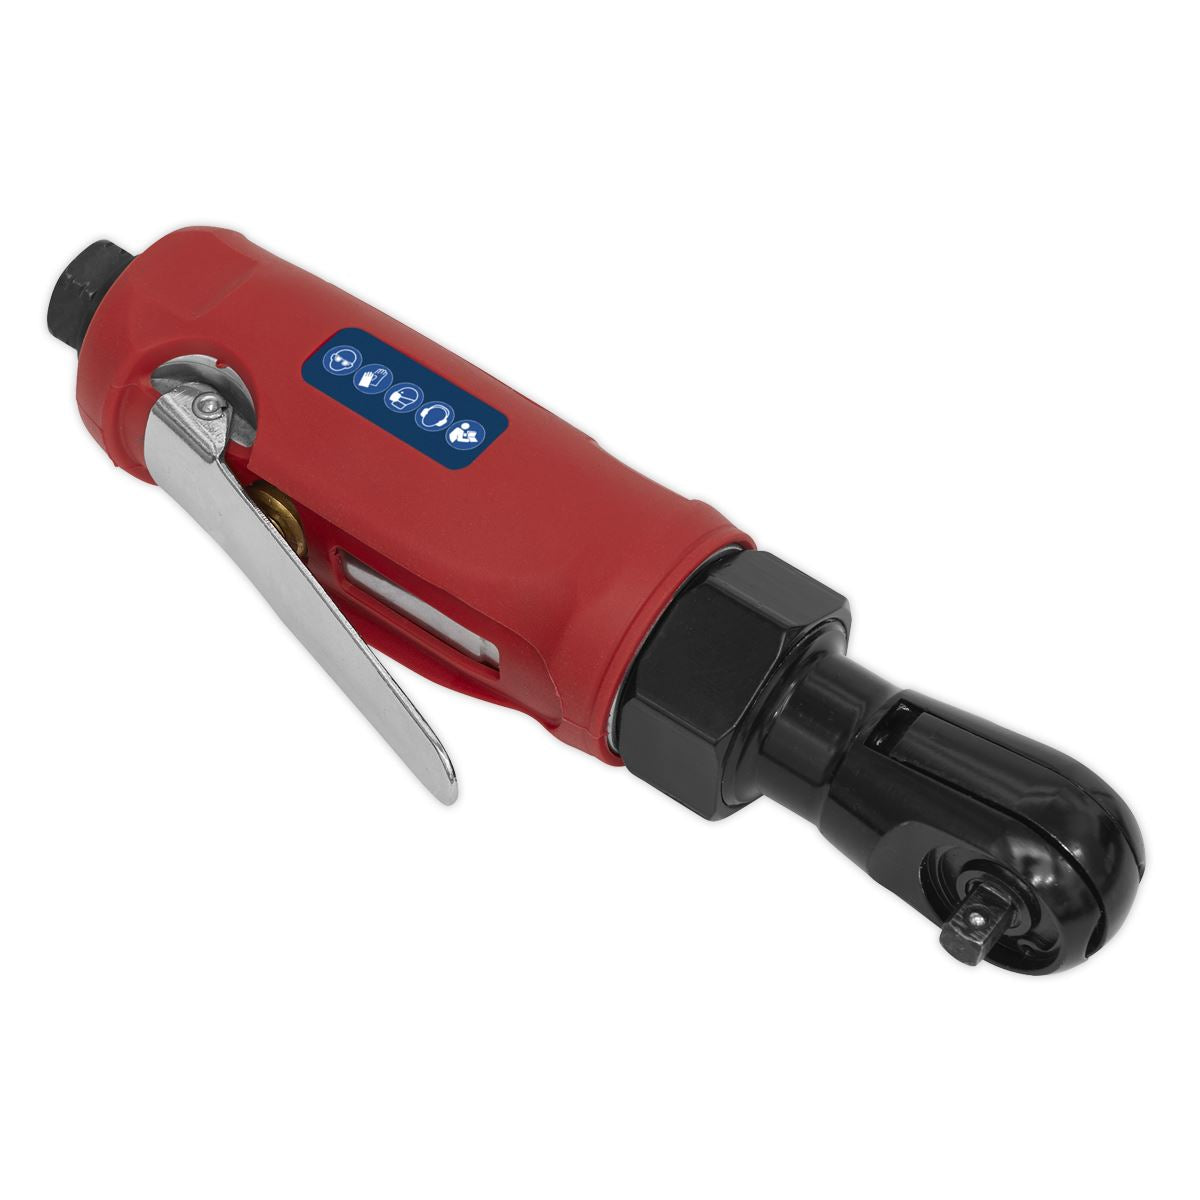 Generation Compact Air Ratchet Wrench 1/4"Sq Drive